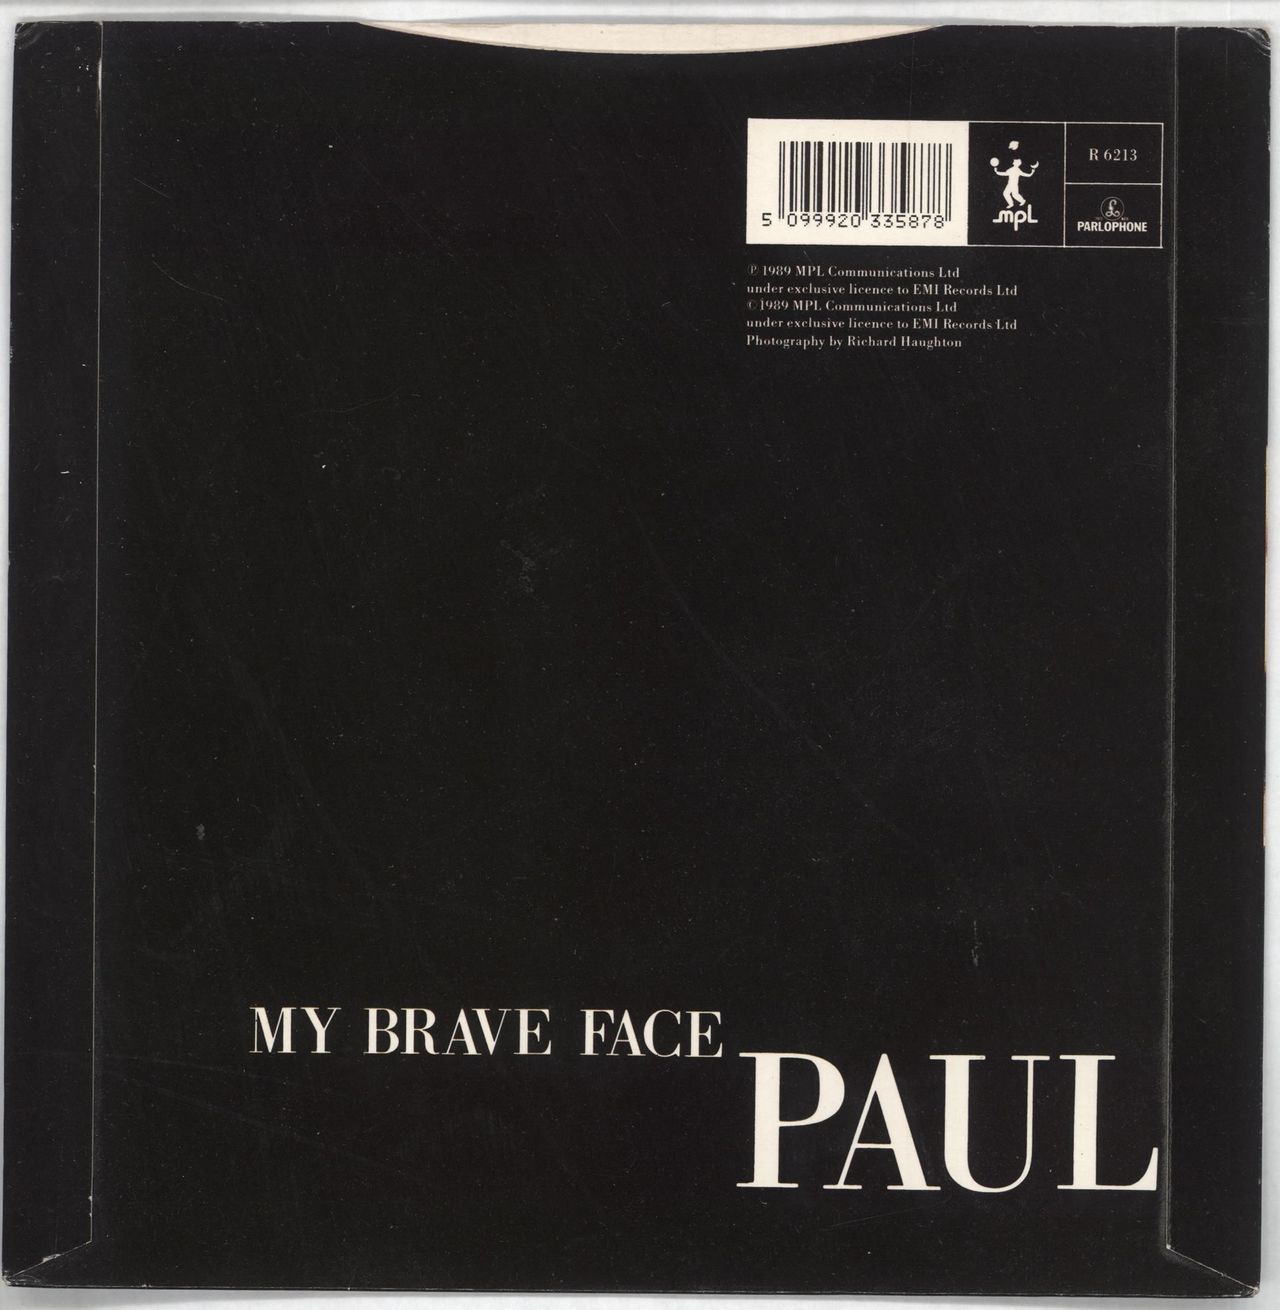 Paul McCartney and Wings My Brave Face - Black label UK 7